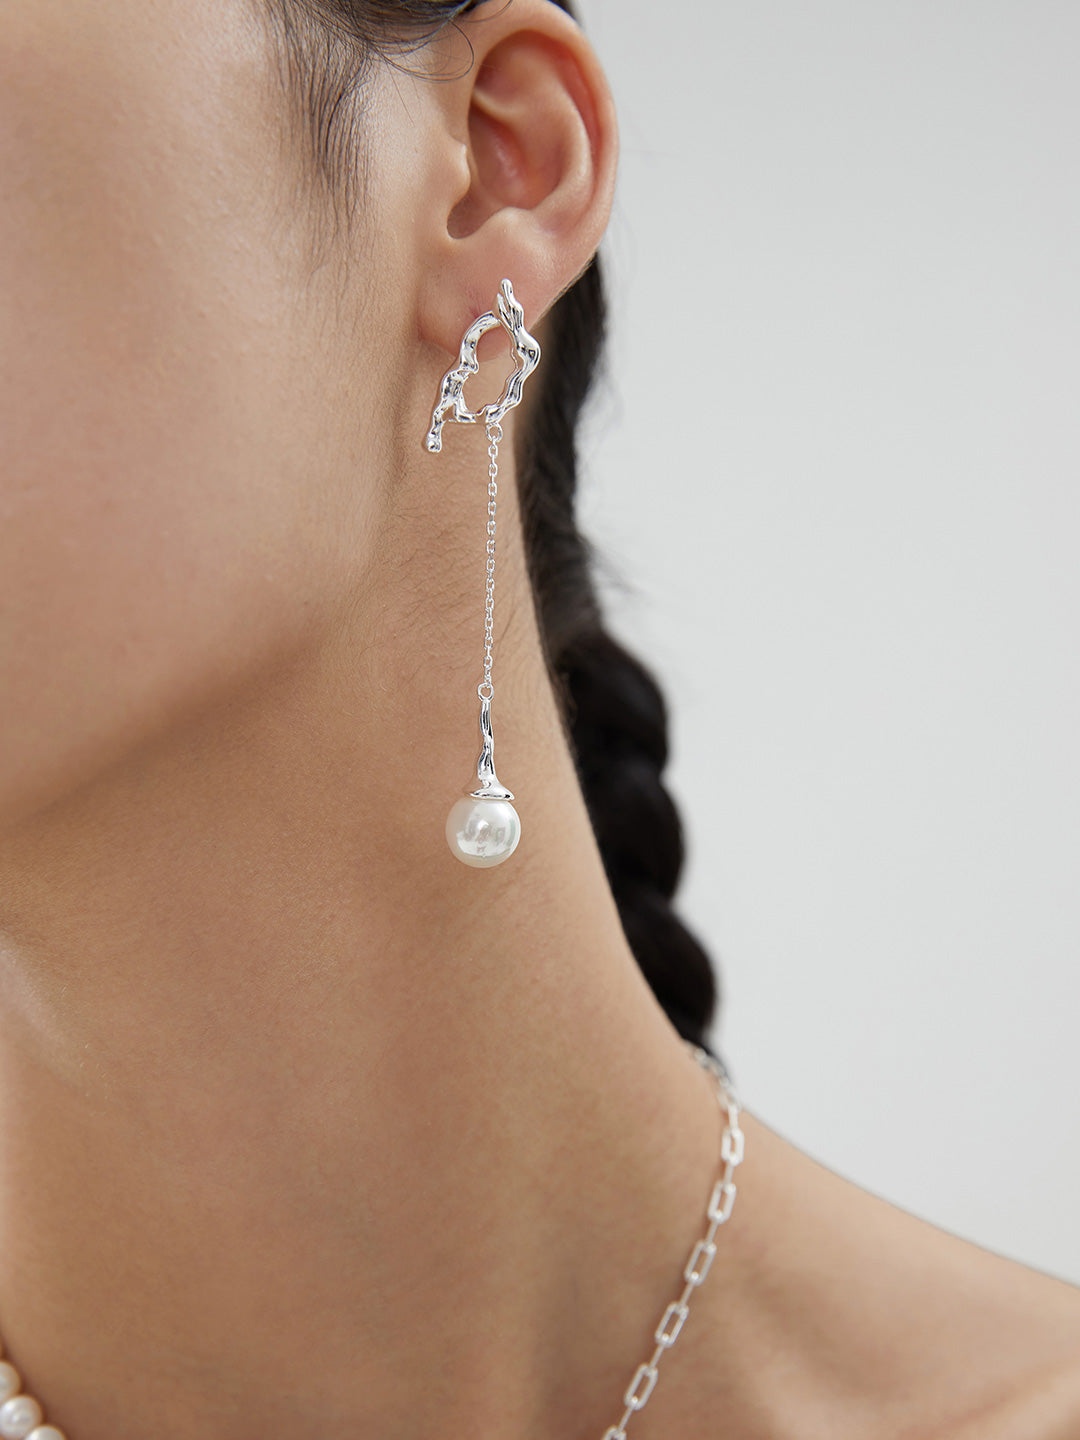 Timeless Elegance Redefined: 10MM Flawless Pearl Silver Necklace & Earrings - Revitalized Collection